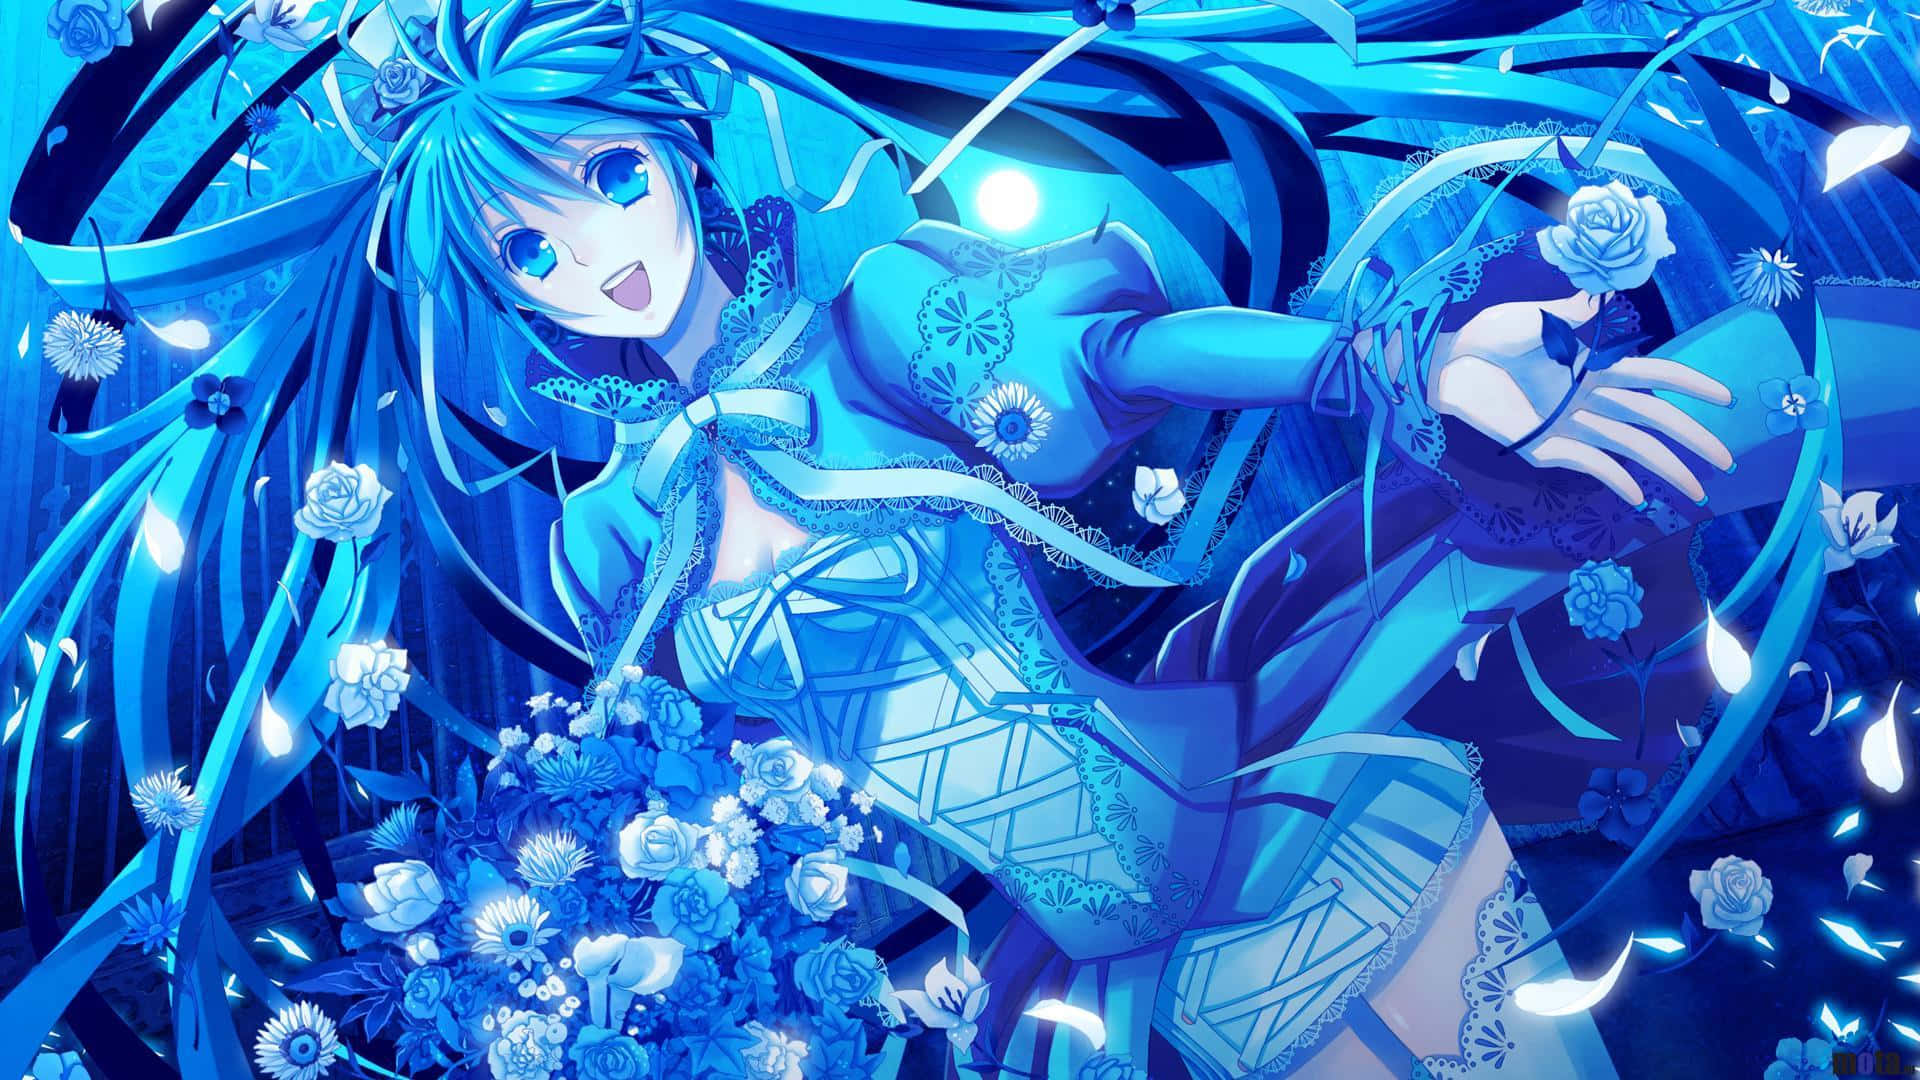 The Japanese Vocaloid star Hatsune Miku comes to life on a digital background